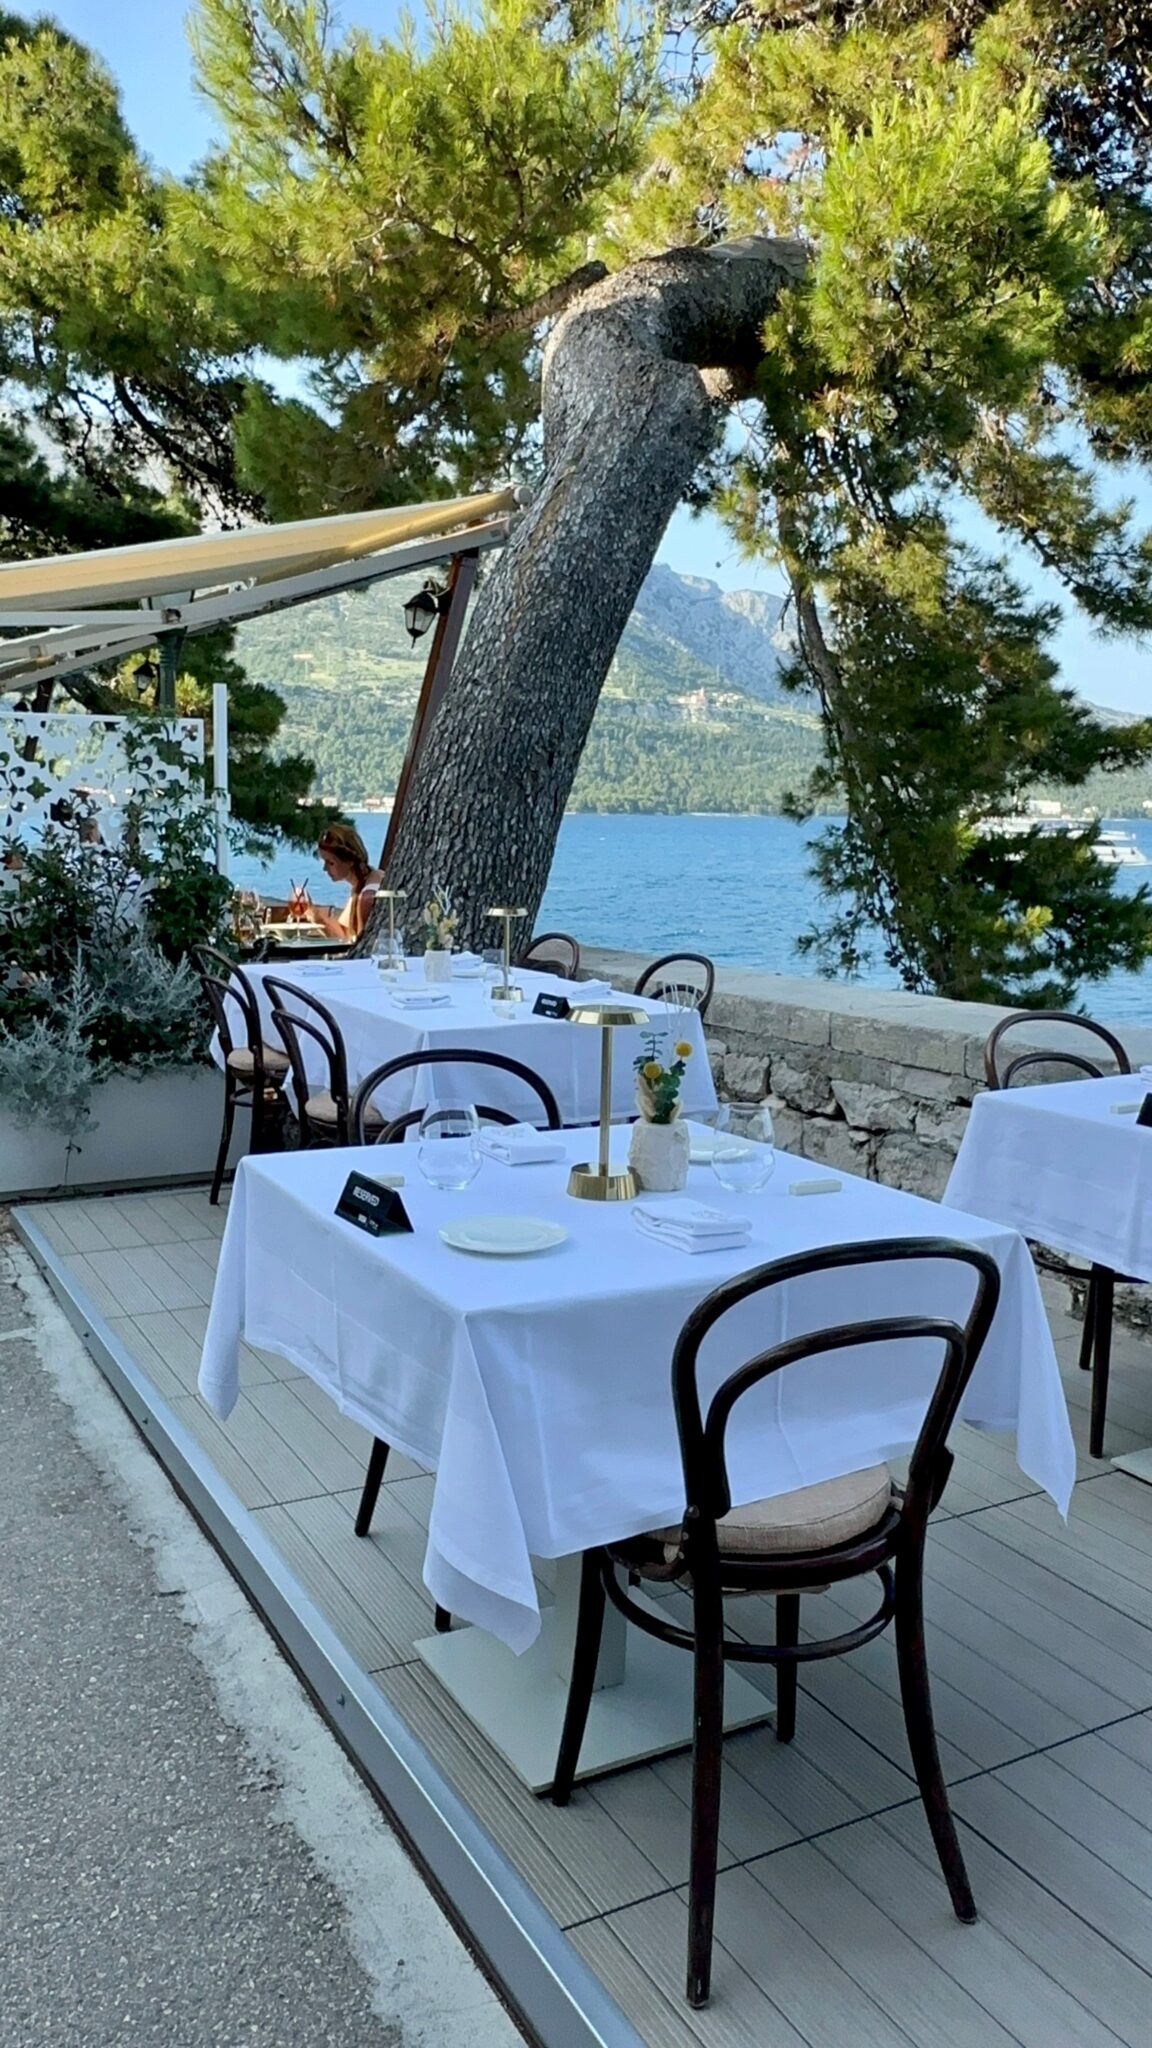 Korcula Old Town Restaurants with Views